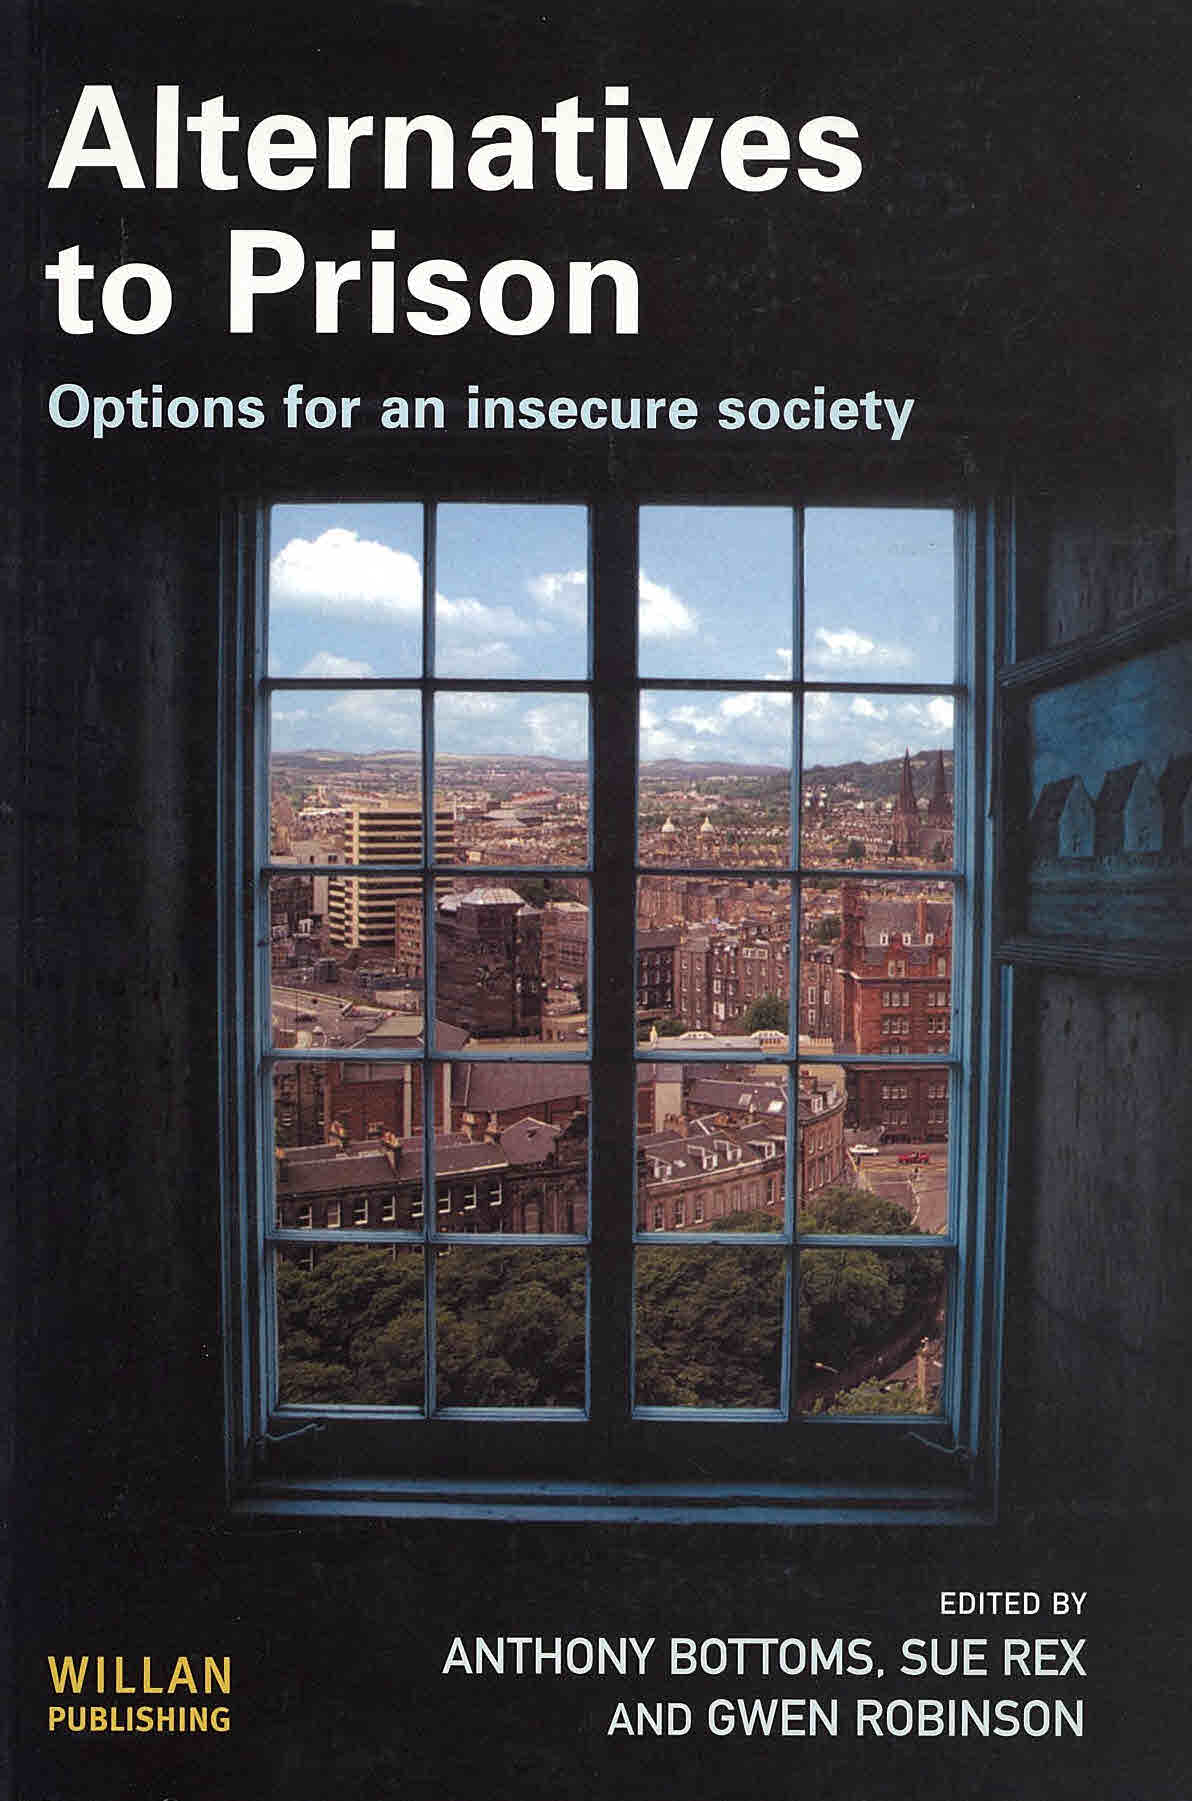 Alternatives to prison: options for an insecure society